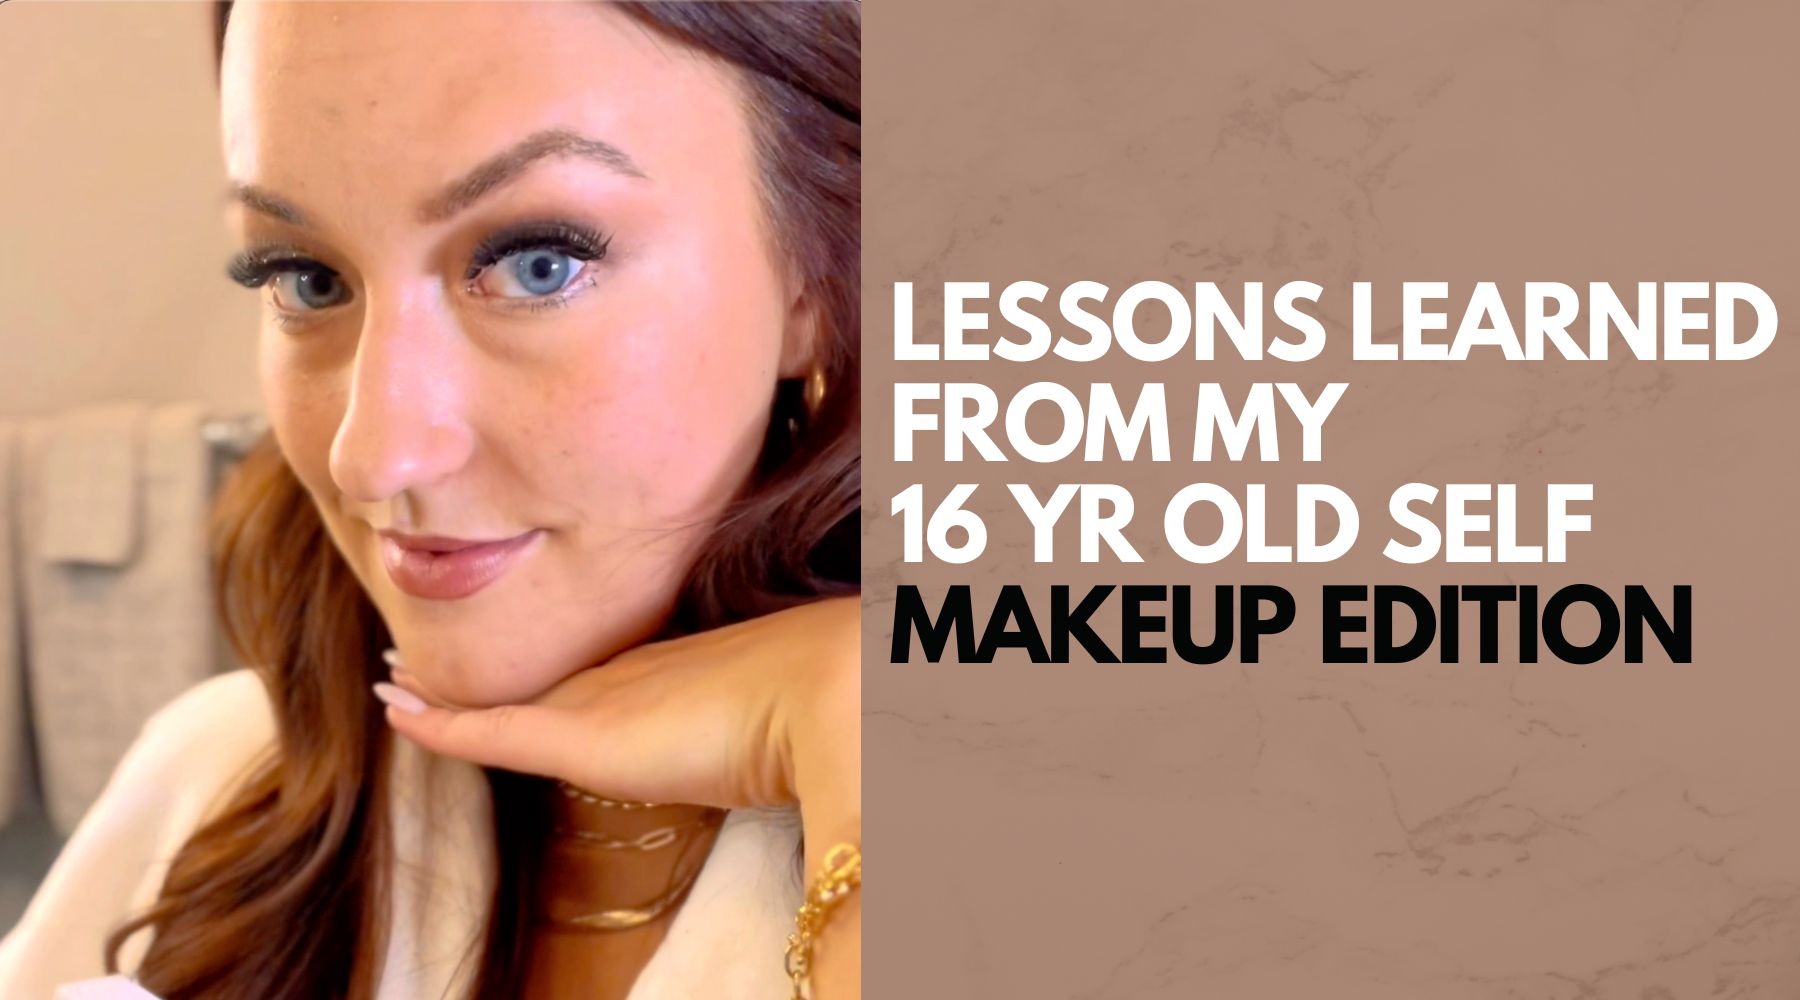 Beauty Lessons Learned From My 16 Yr Old Self - Makeup Edition